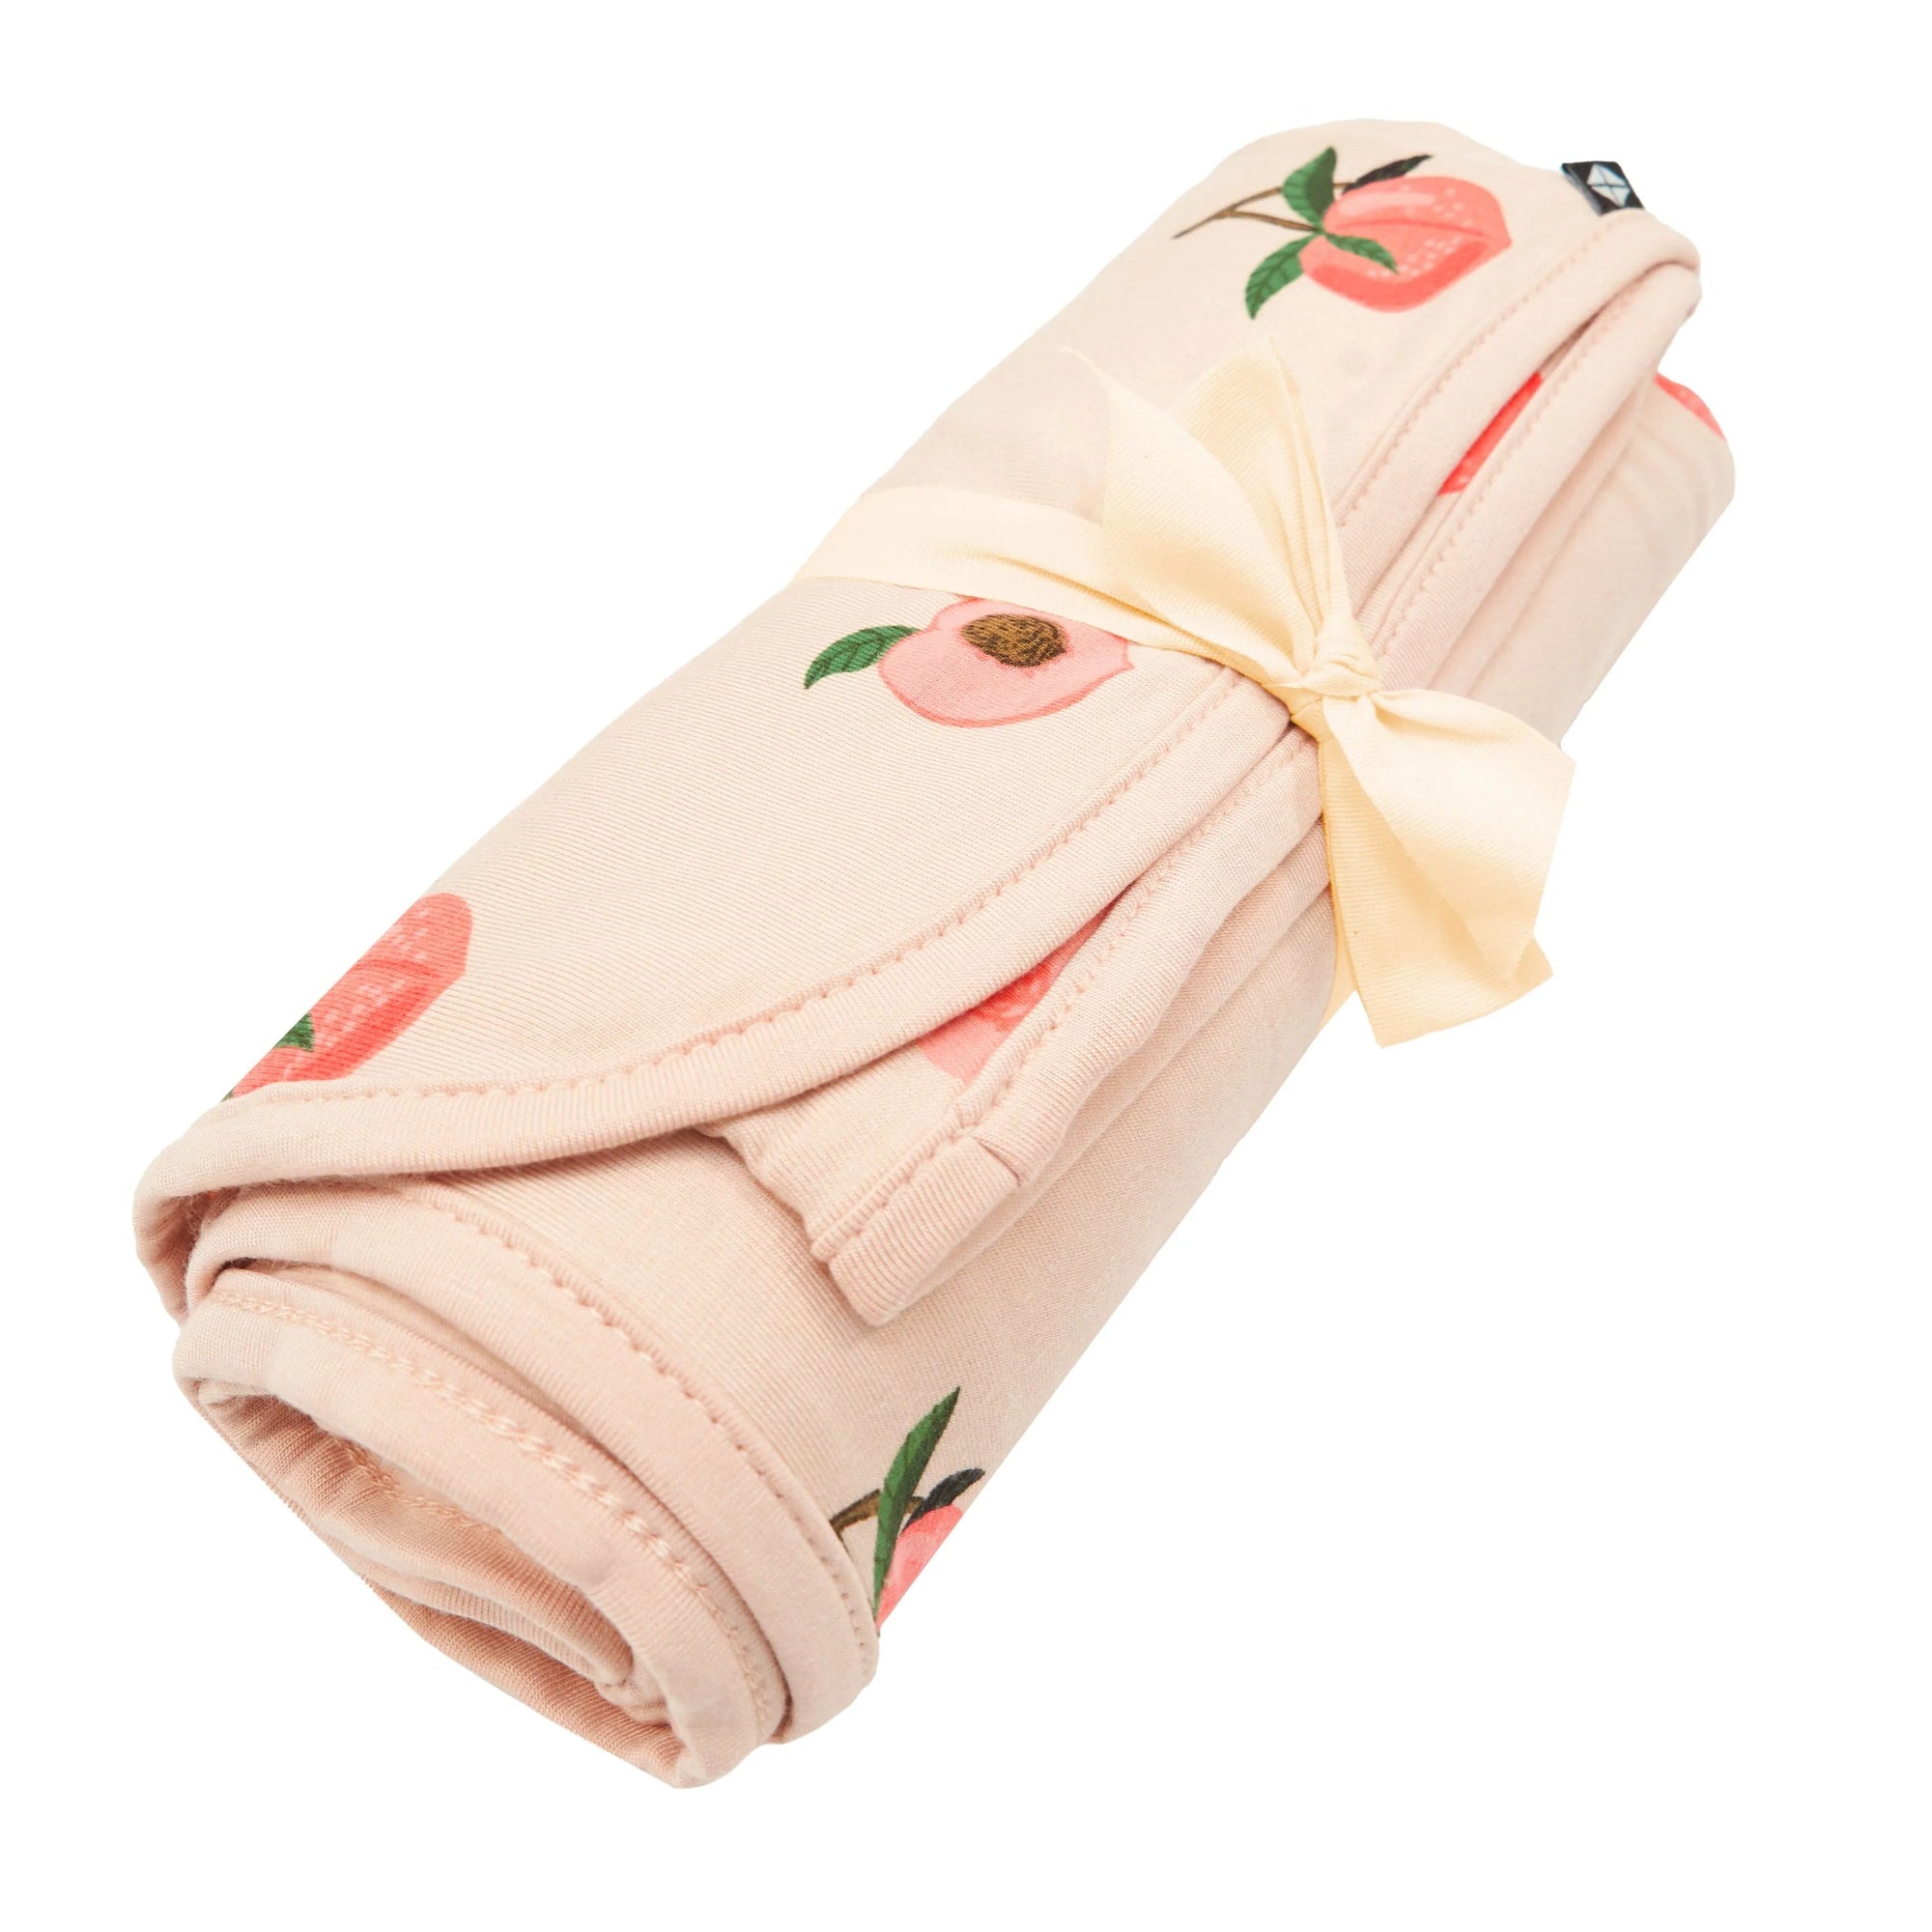 Kyte Baby Bamboo Swaddle Blanket - Peach